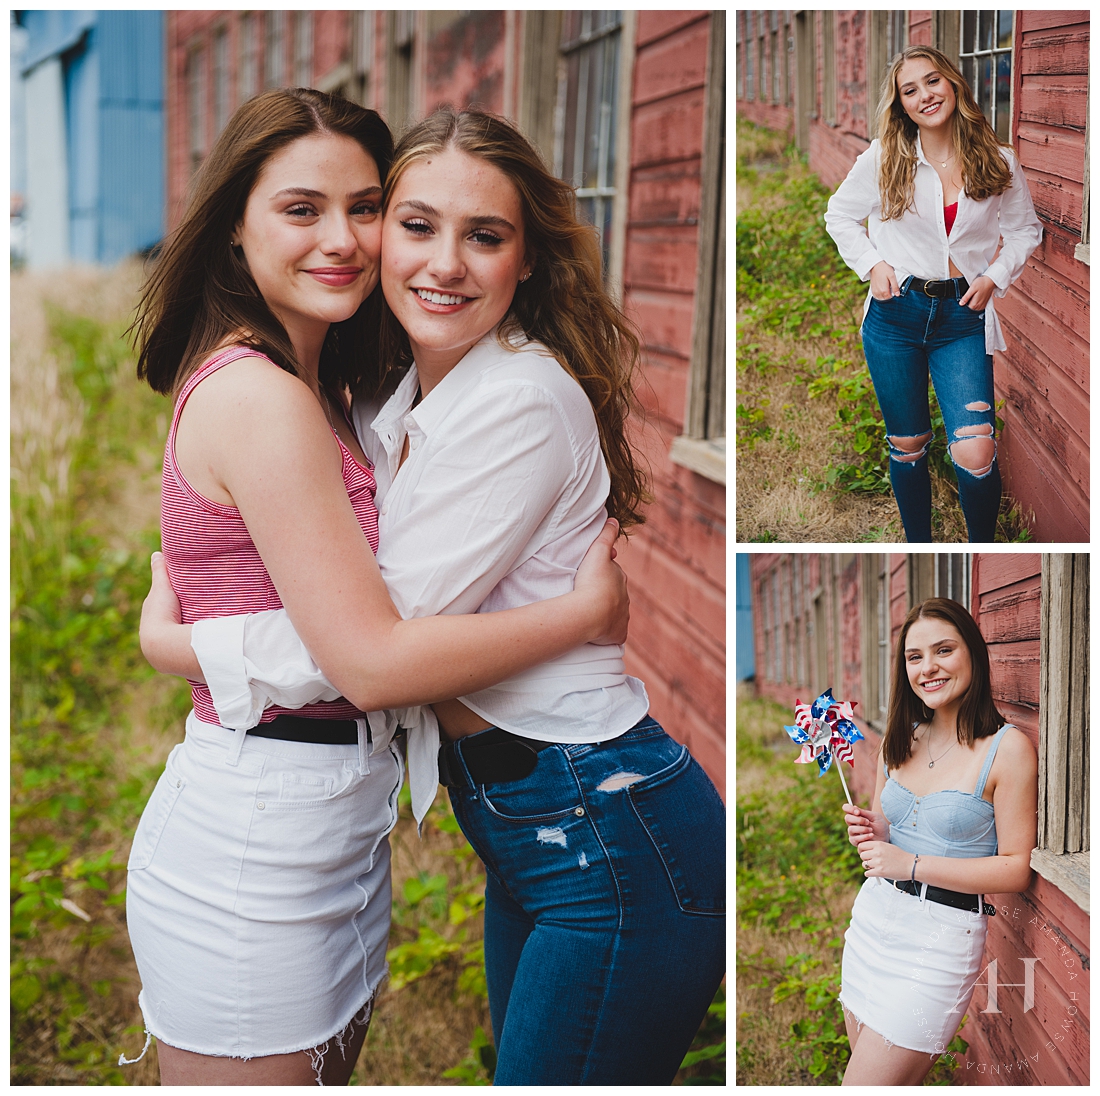 Cute BFF Photoshoot with Outfit Ideas | Photographed by Tacoma Senior Photographer Amanda Howse